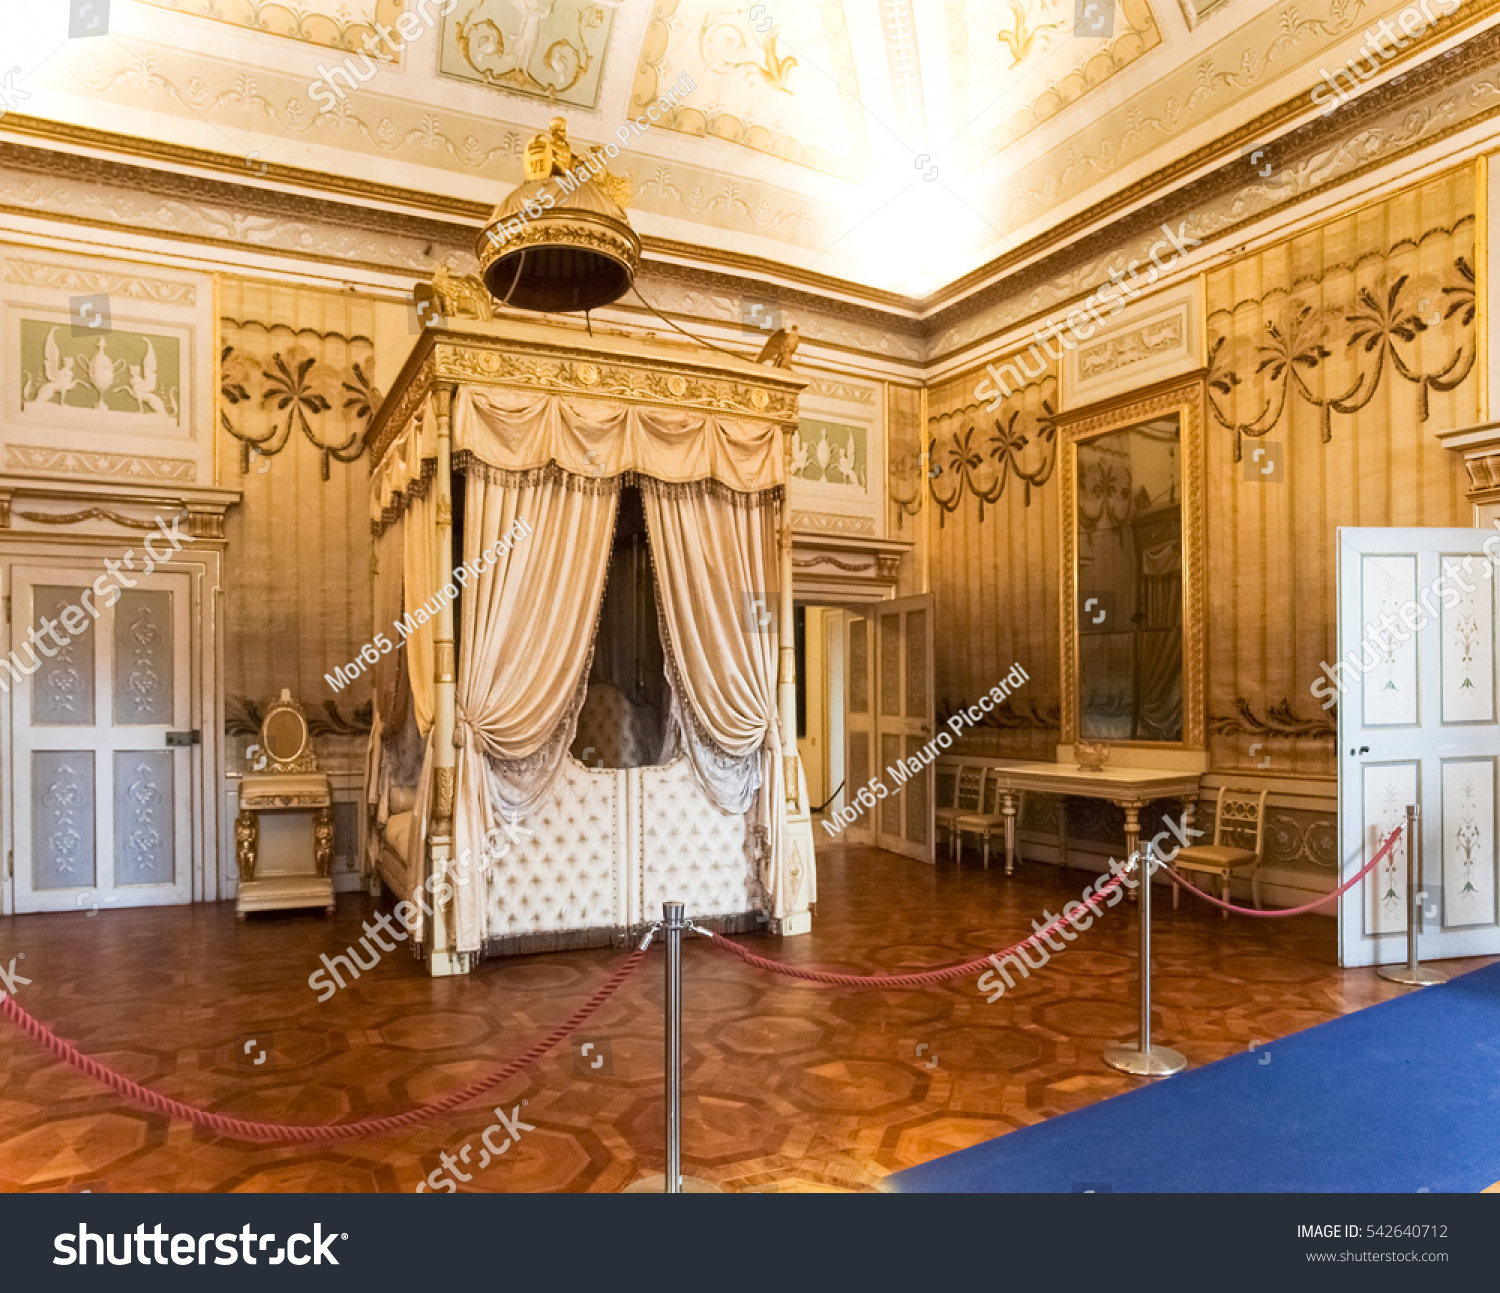 Mantova, Italy - January 8, 2016: Palazzo Ducale in Mantua, also known as the Gonzaga palace, is one of the main historic buildings citizens. #542640712